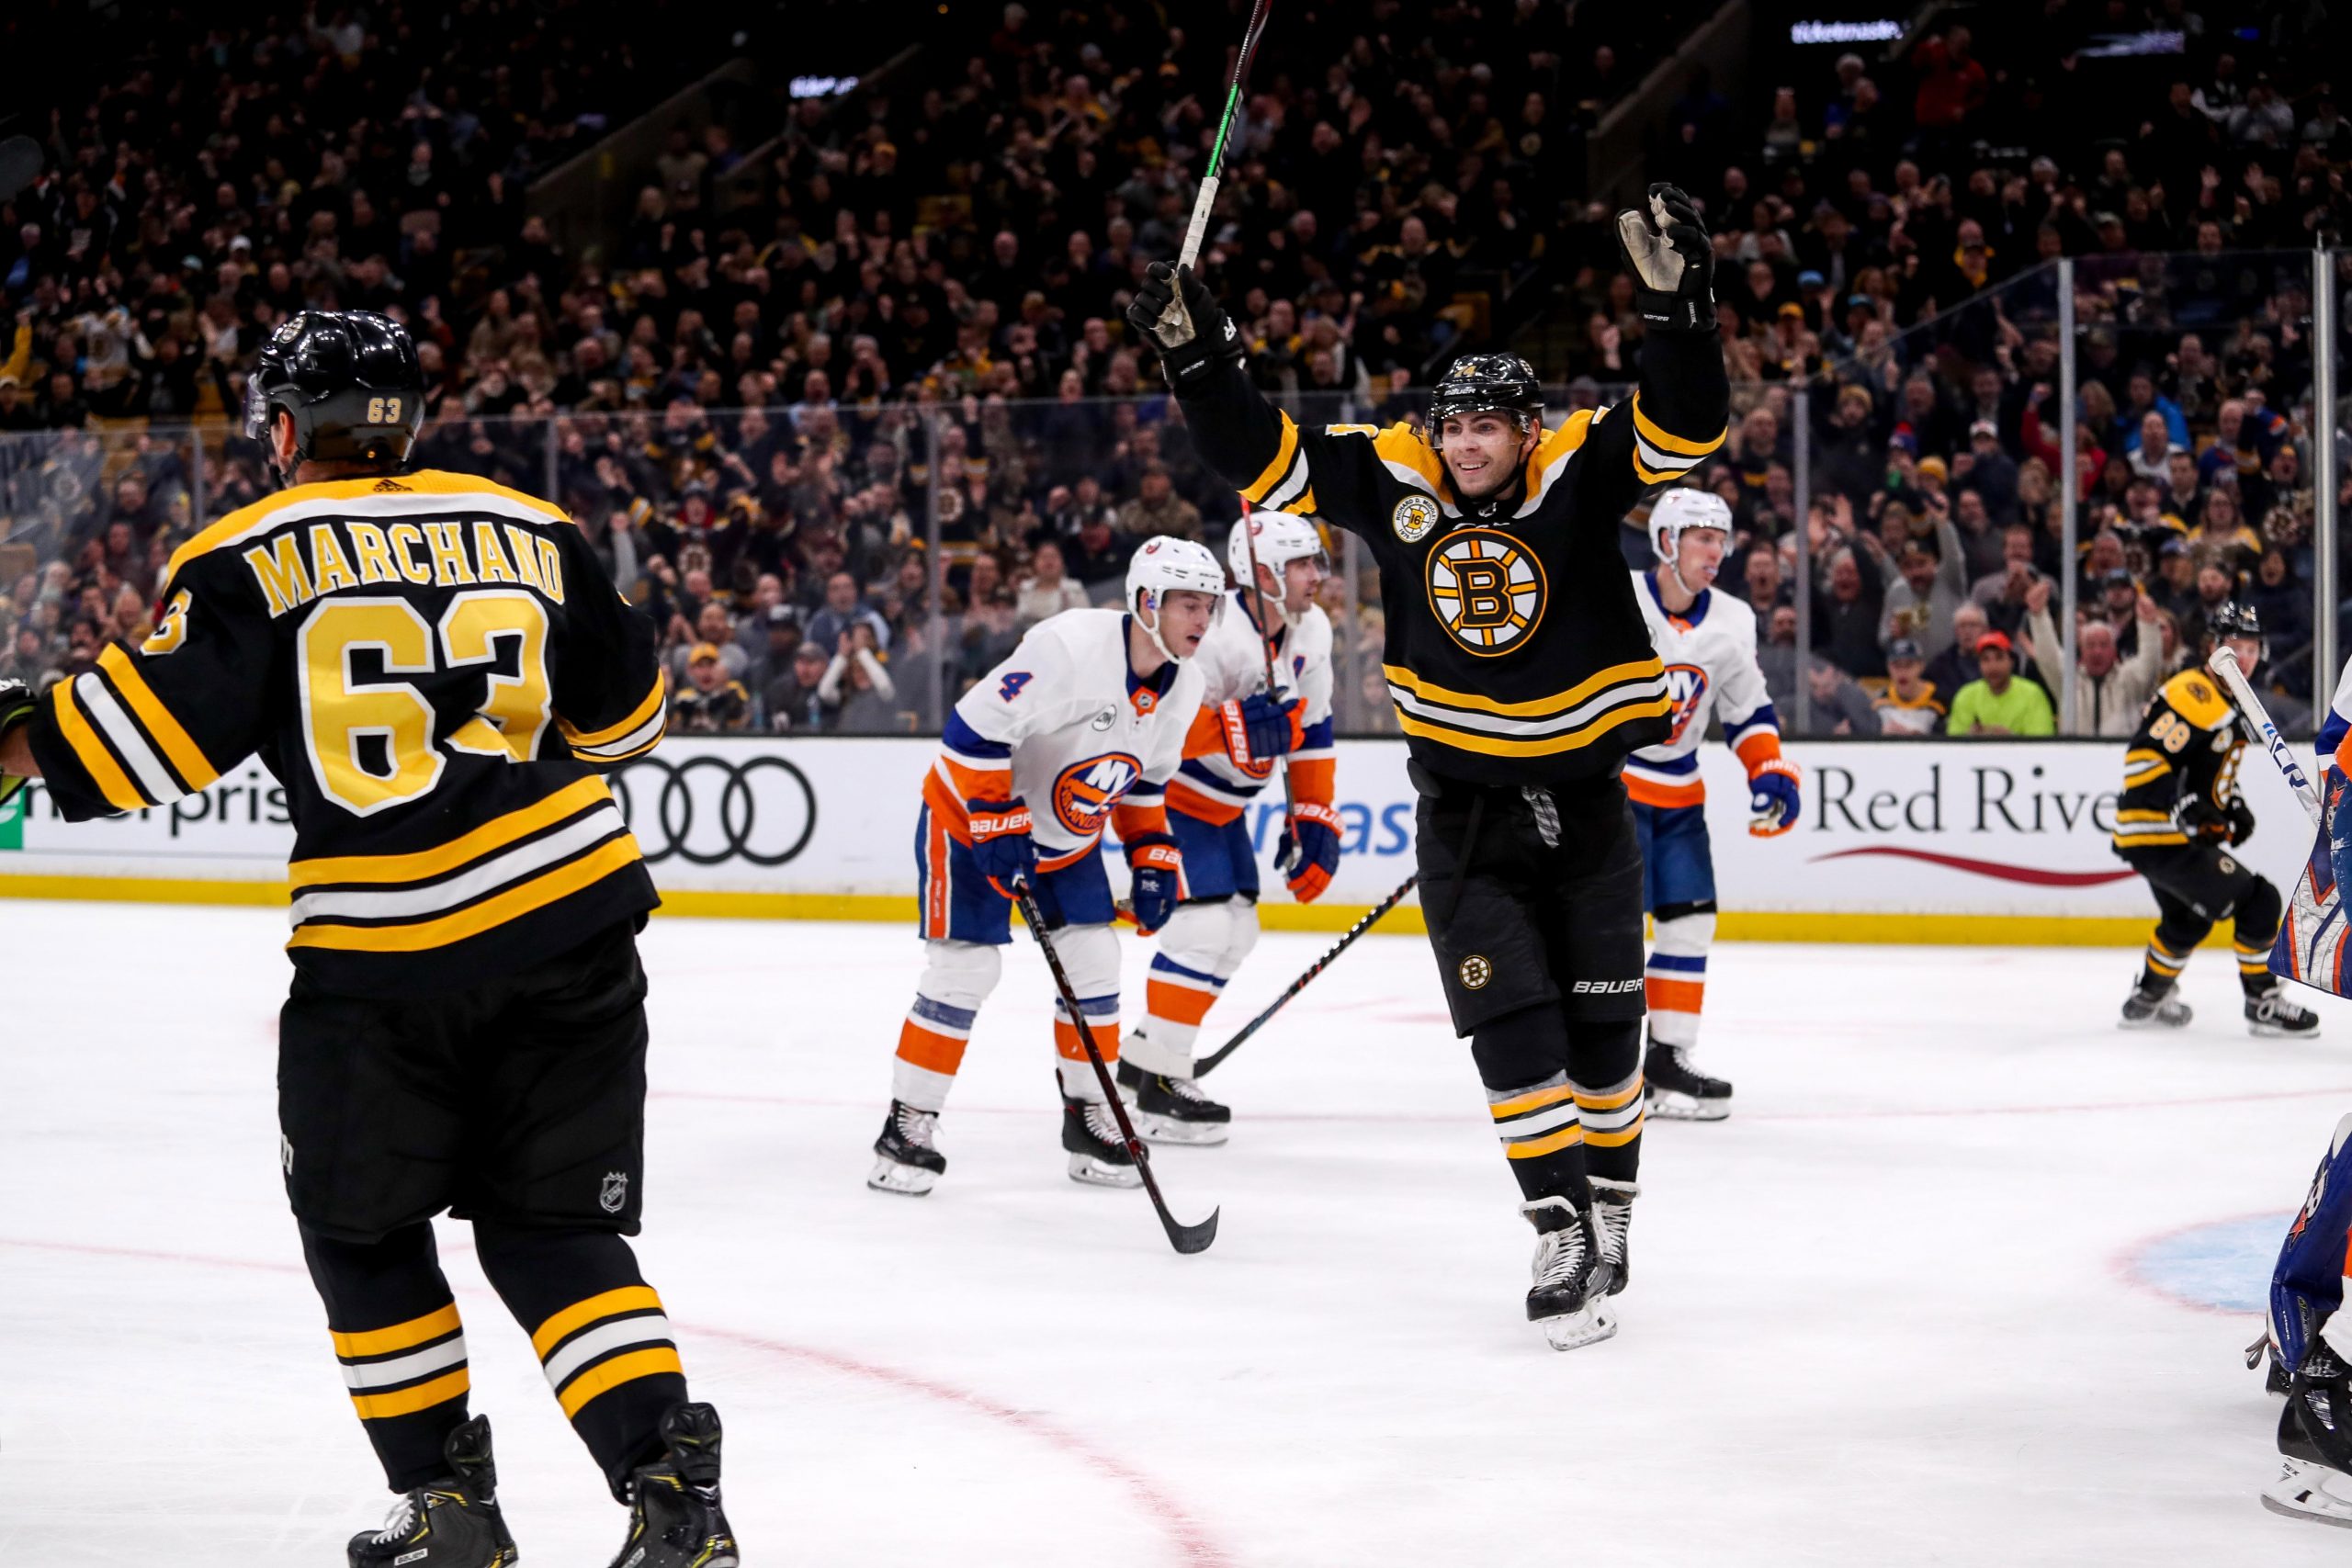 Nov 29, 2018; Boston, MA, USA; Boston Bruins left wing Jake DeBrusk (74) celebrates after a goal by Boston left wing Brad Marchand (63) against the New York Islanders during the second period at TD Garden. Mandatory Credit: Paul Rutherford-USA TODAY Sports